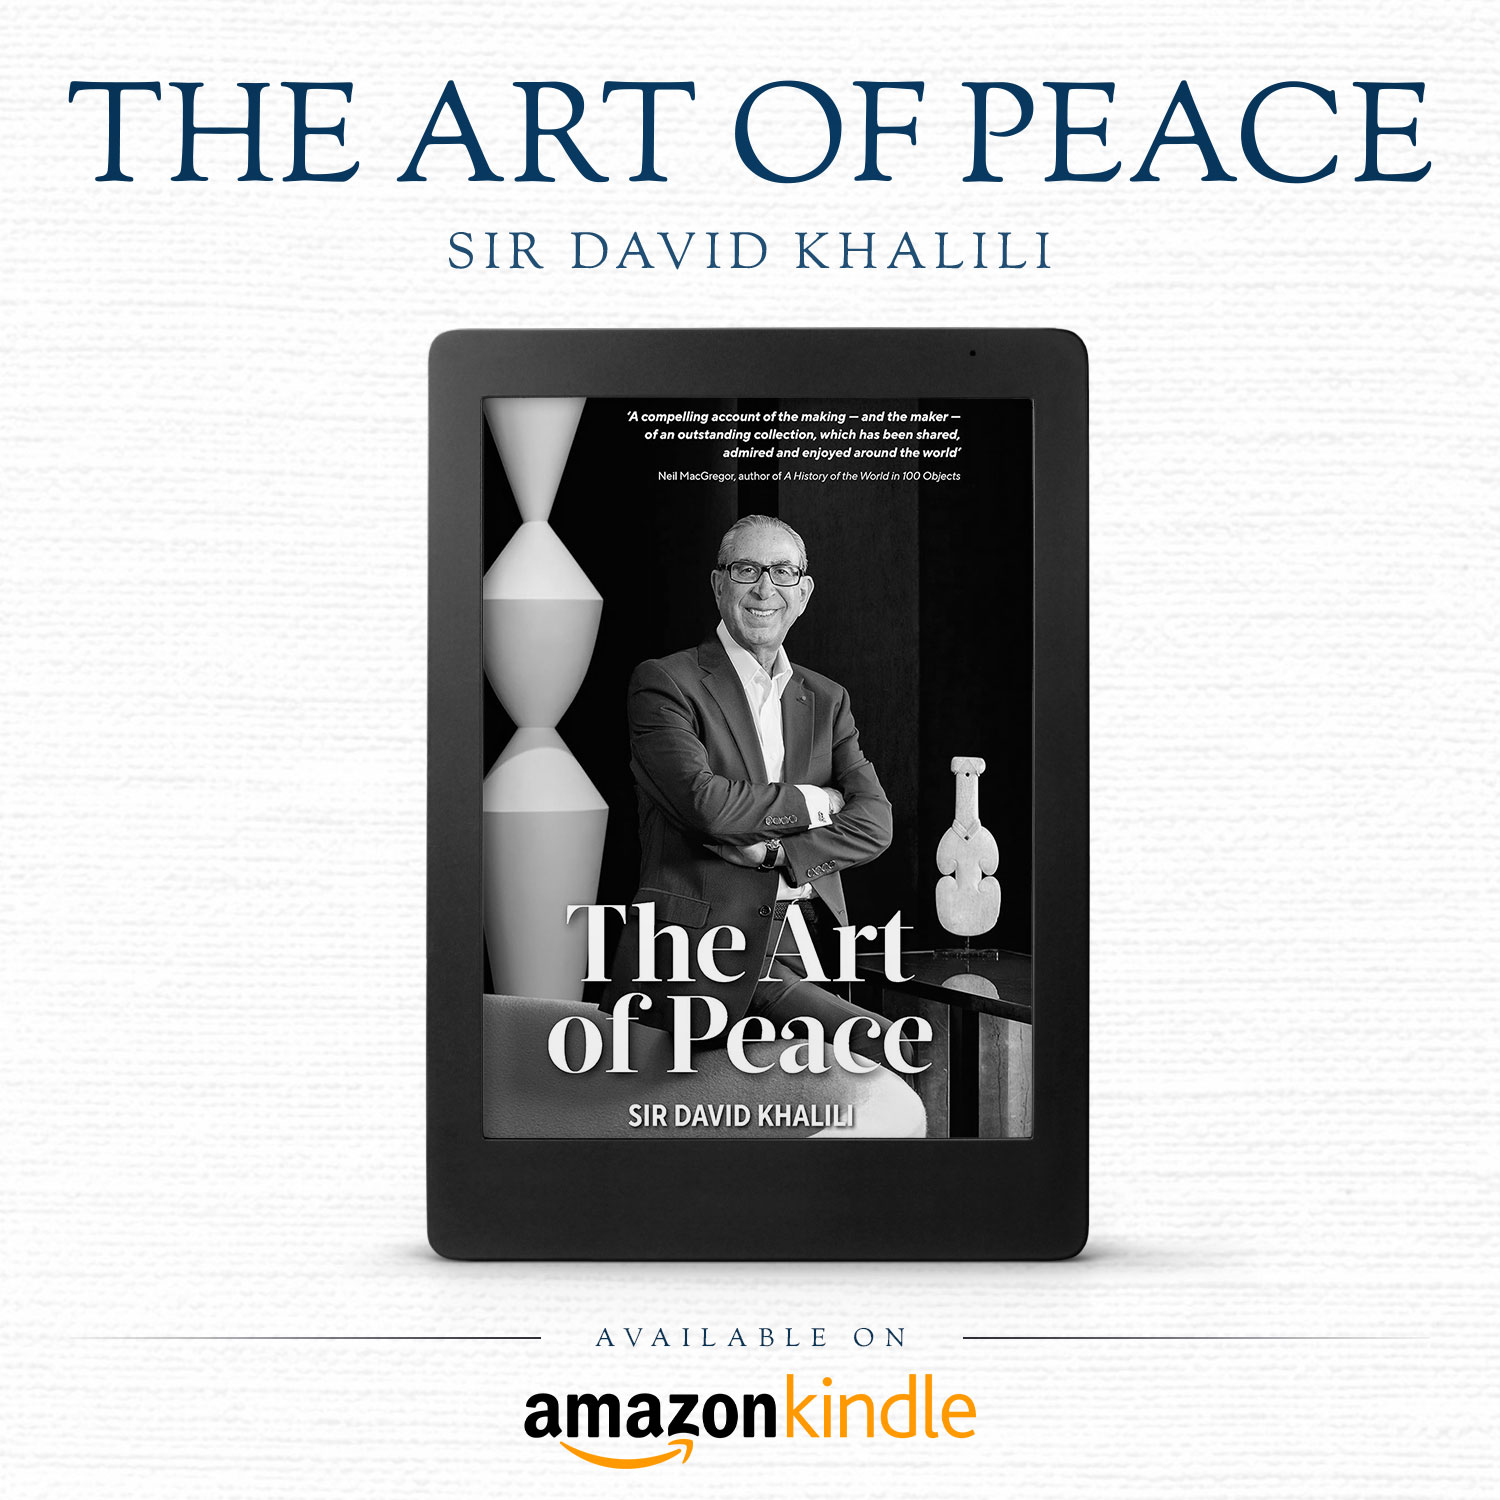 Discover ‘The Art of Peace’ by Sir David Khalili: A Journey through Art, Available on Kindle